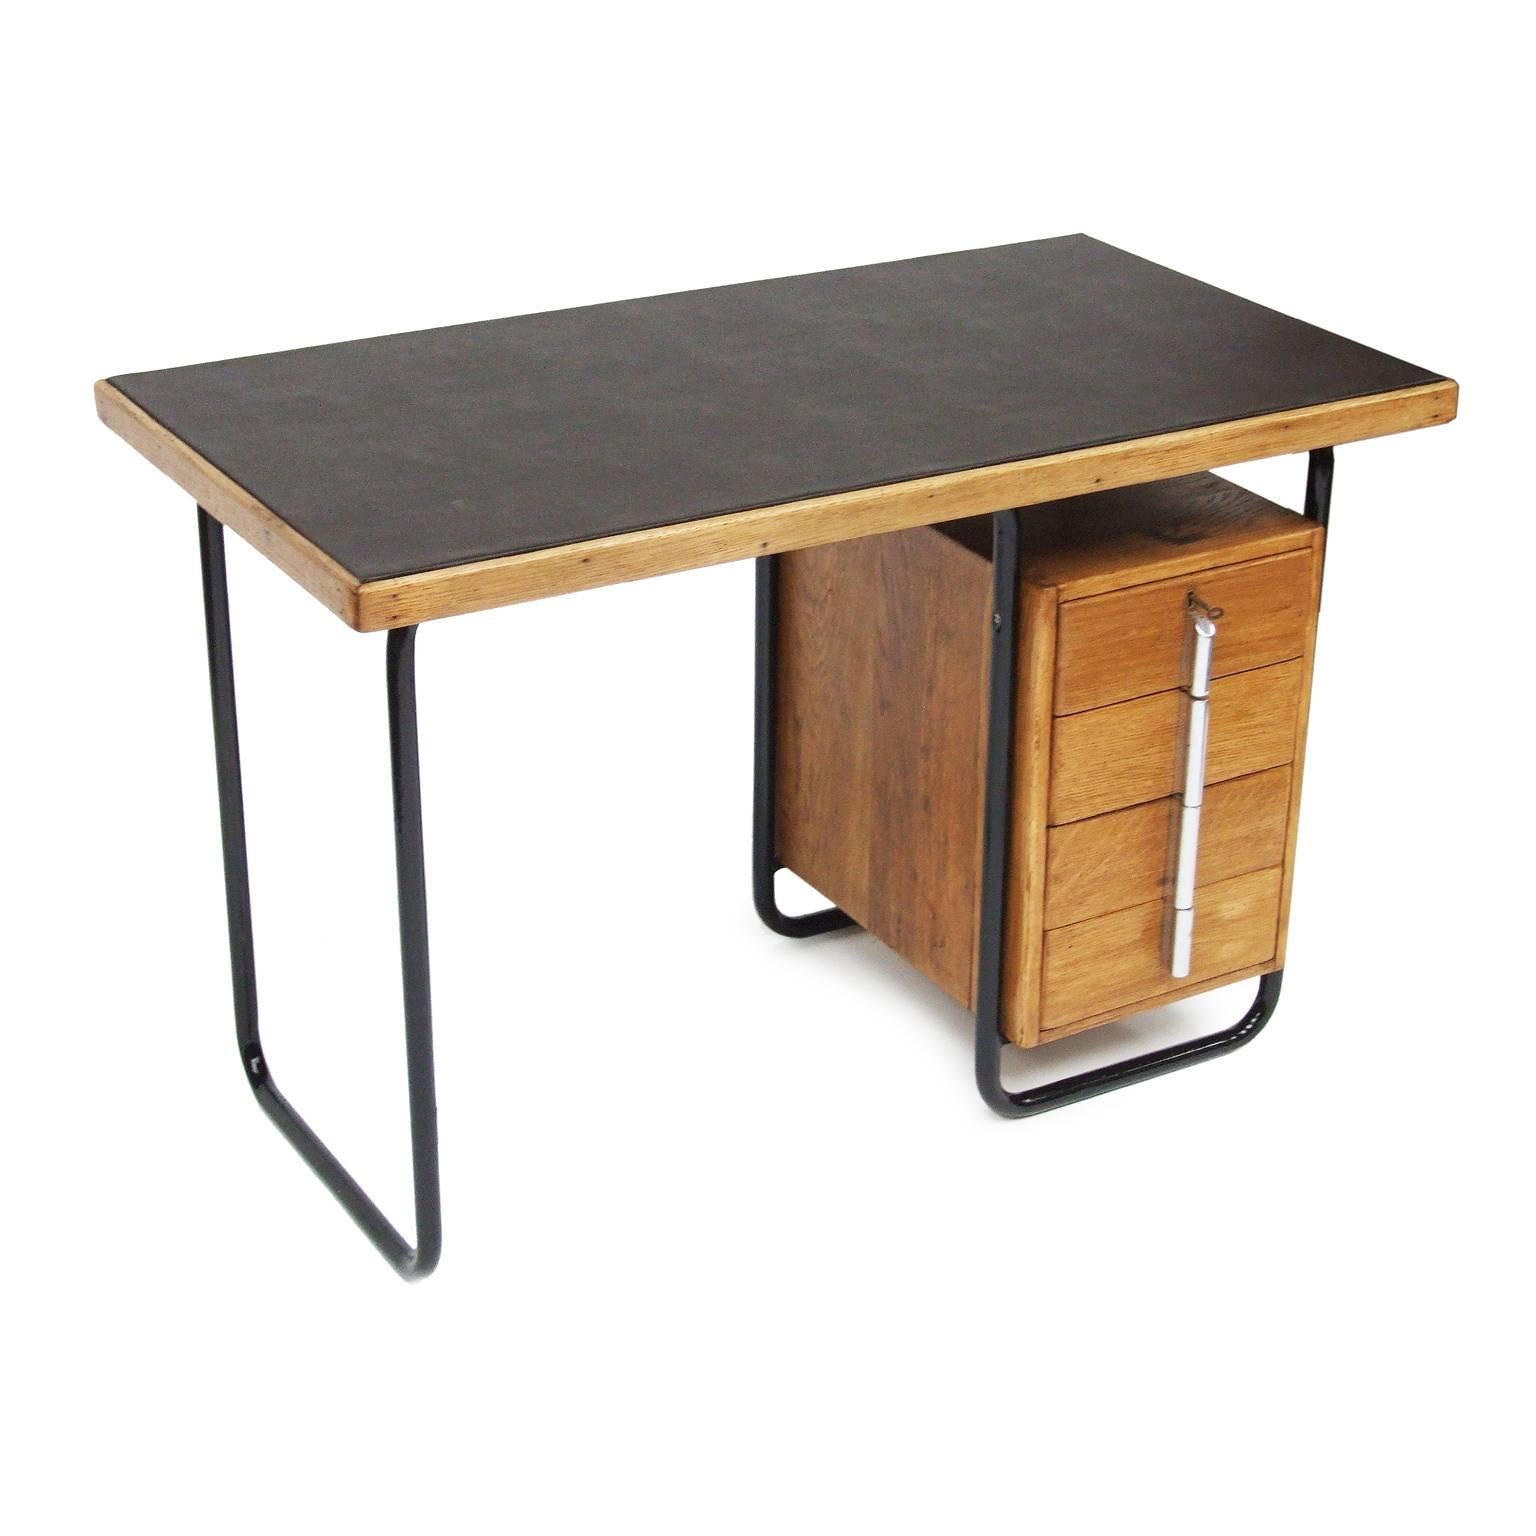 1930s modernist desk designed by Wells Coates for Kingfisher, UK.

Black tubular steel frame with oak drawer unit. Brown leatherette worktop.

Four matching drawers with chrome handles. Lockable top drawer with key.
Kingfisher